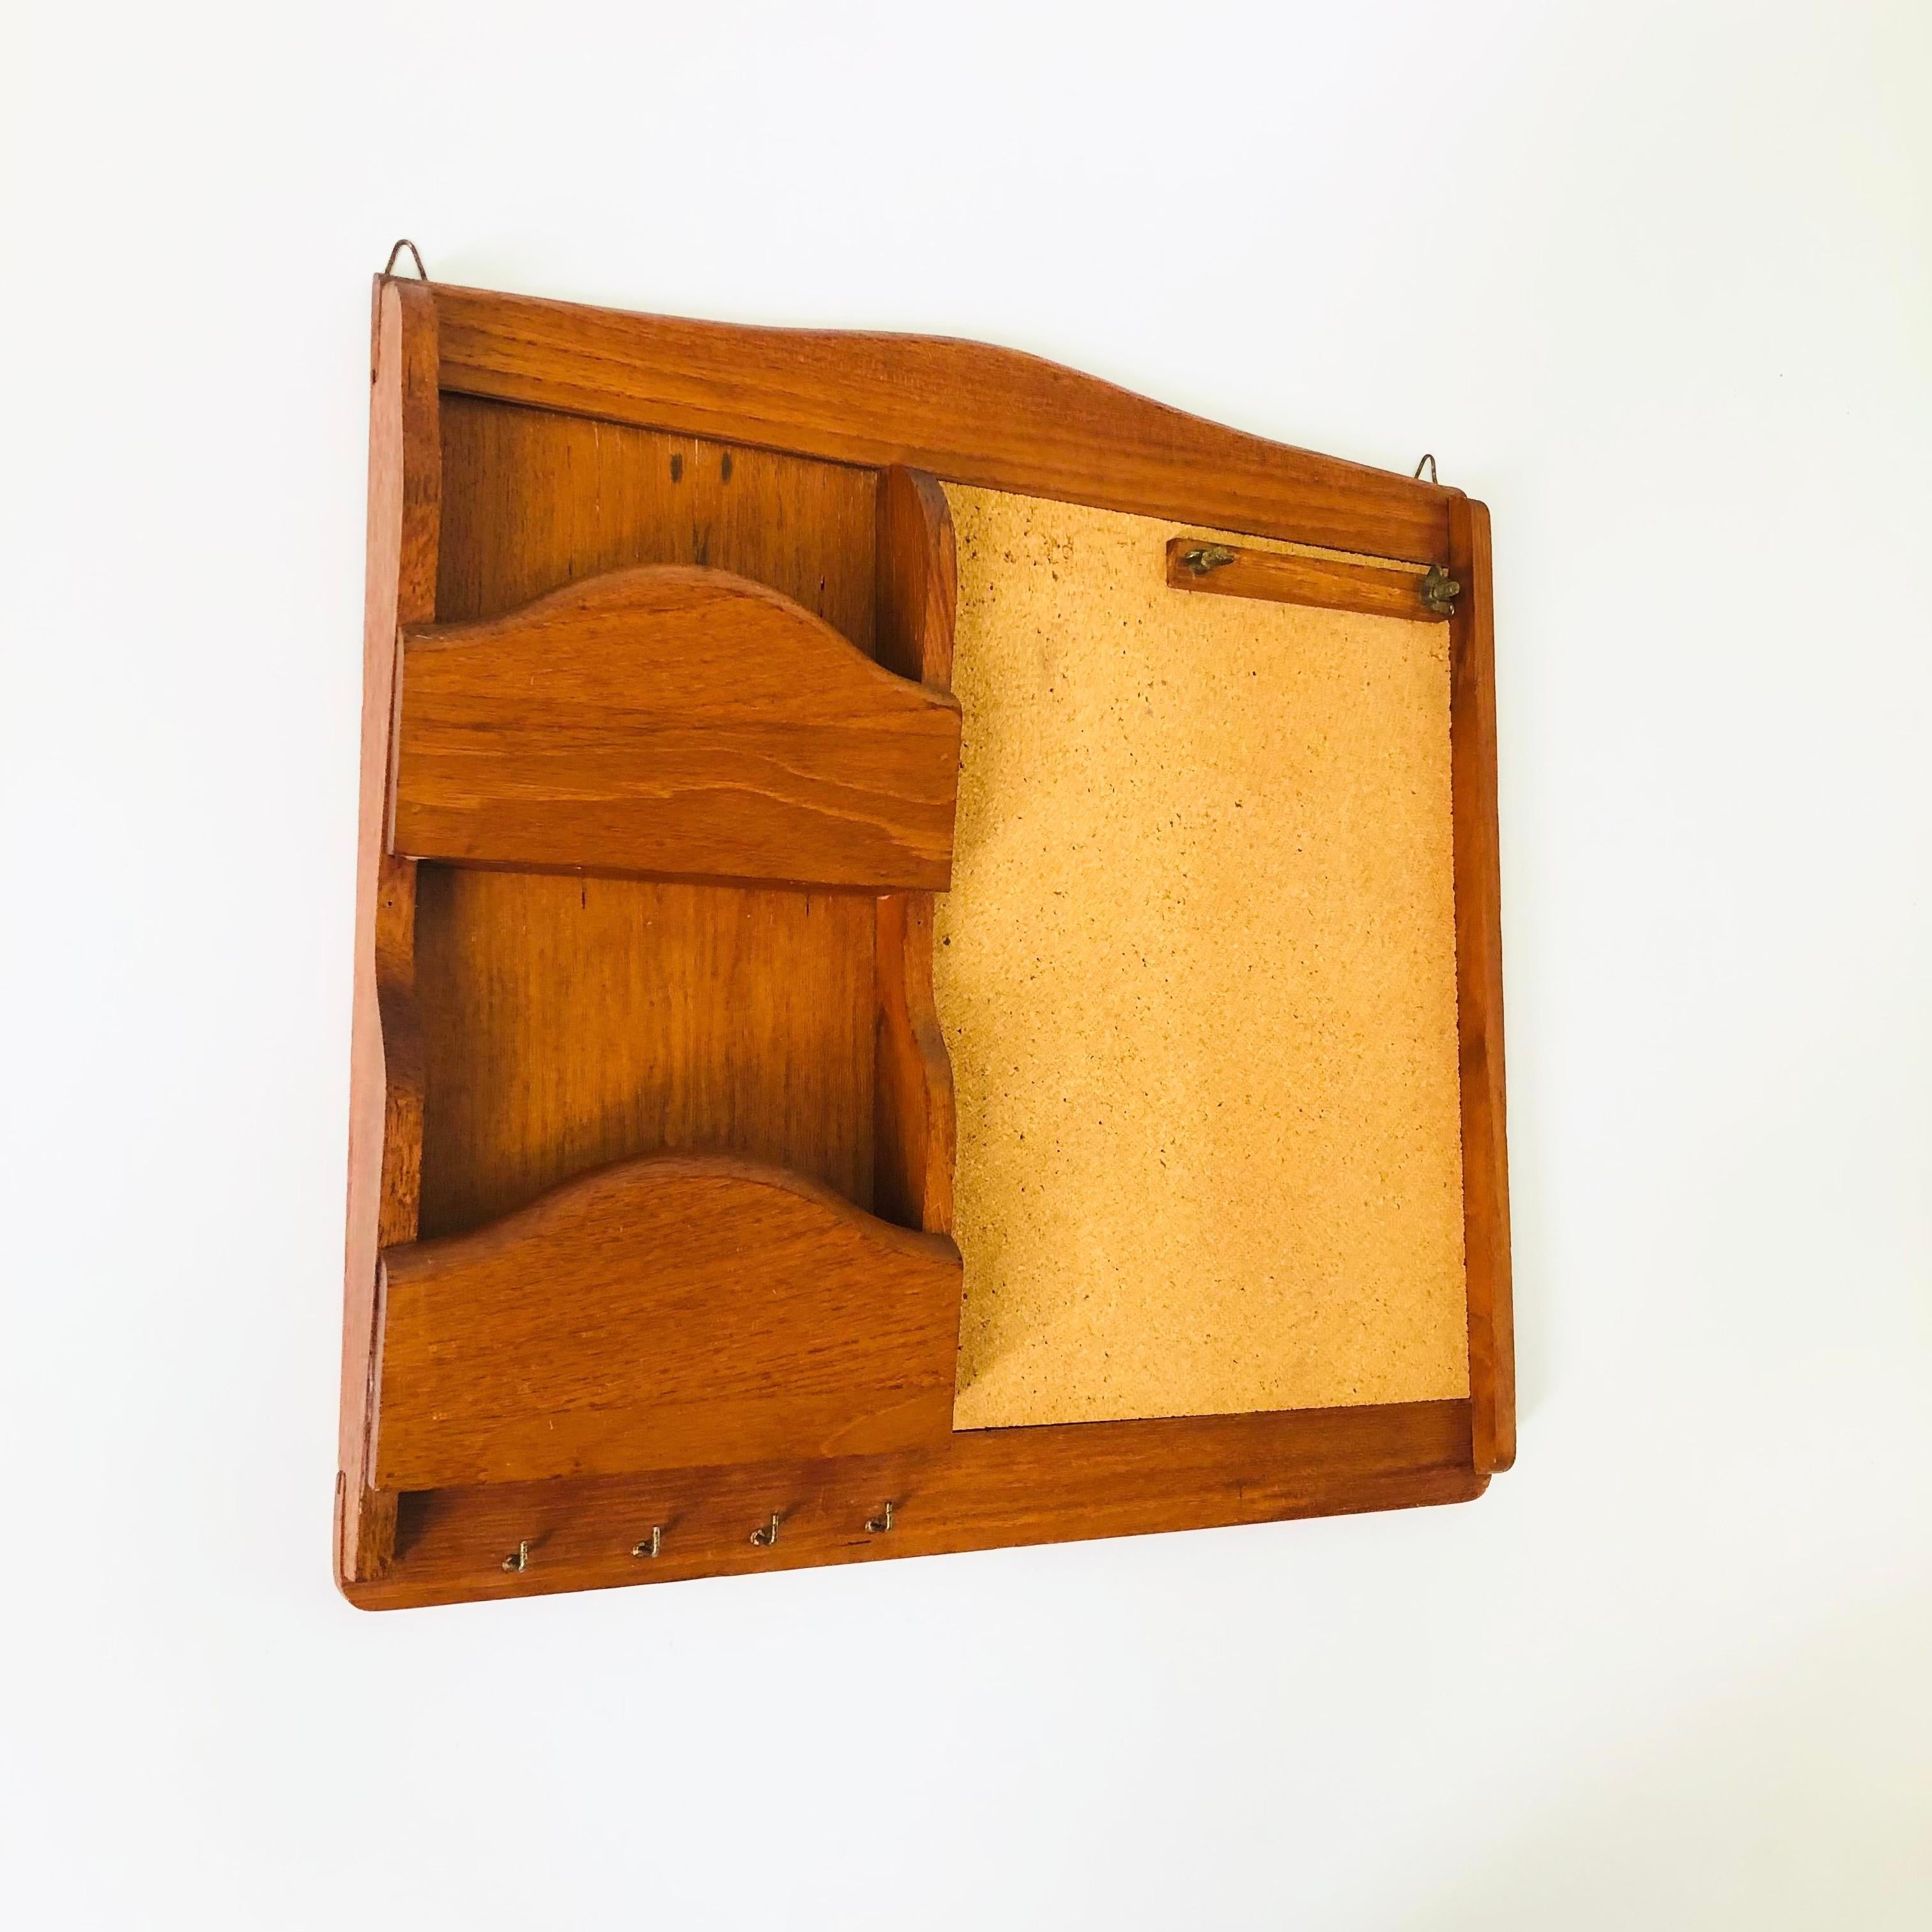 A vintage teak letter holder and cork board. There are 2 compartments for storing paper items with hooks below for hanging keys. A rectangular cork board is on the right with screws for clamping a note pad. A great entry way organizational piece.

